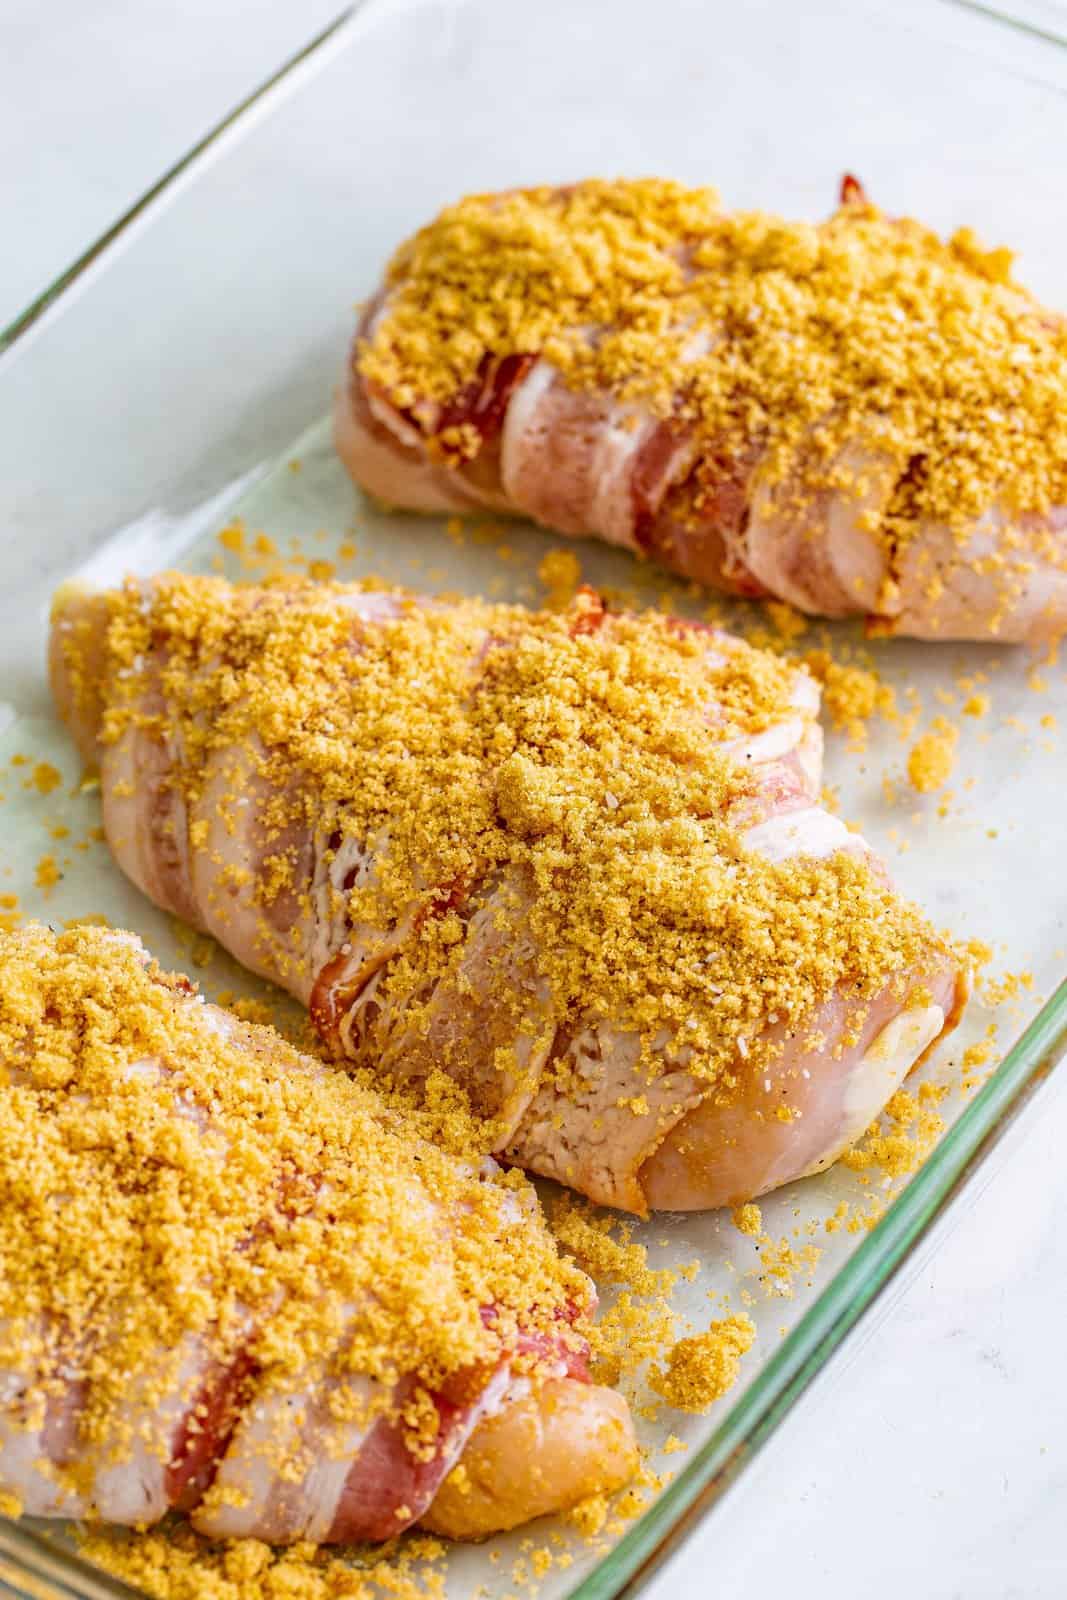 Brown sugar on top of bacon wrapped chicken.